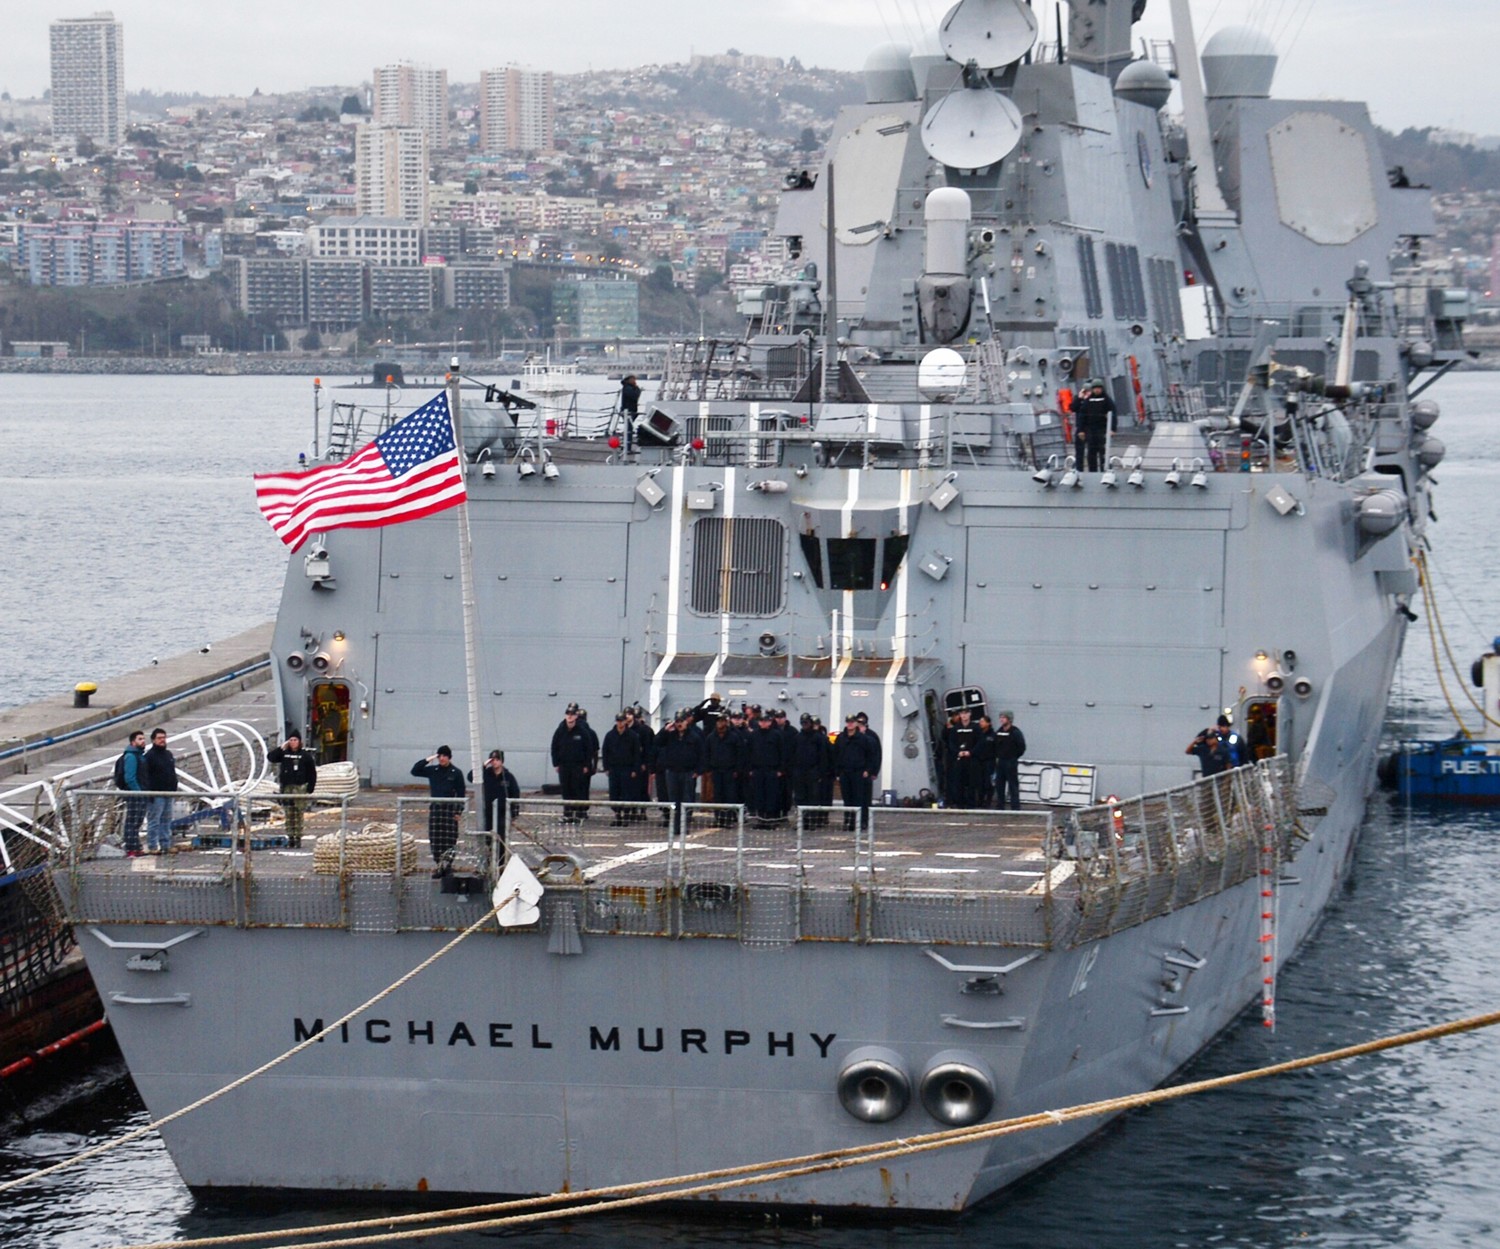 ddg-112 uss michael murphy arleigh burke class guided missile destroyer aegis us navy valparaiso chile 61